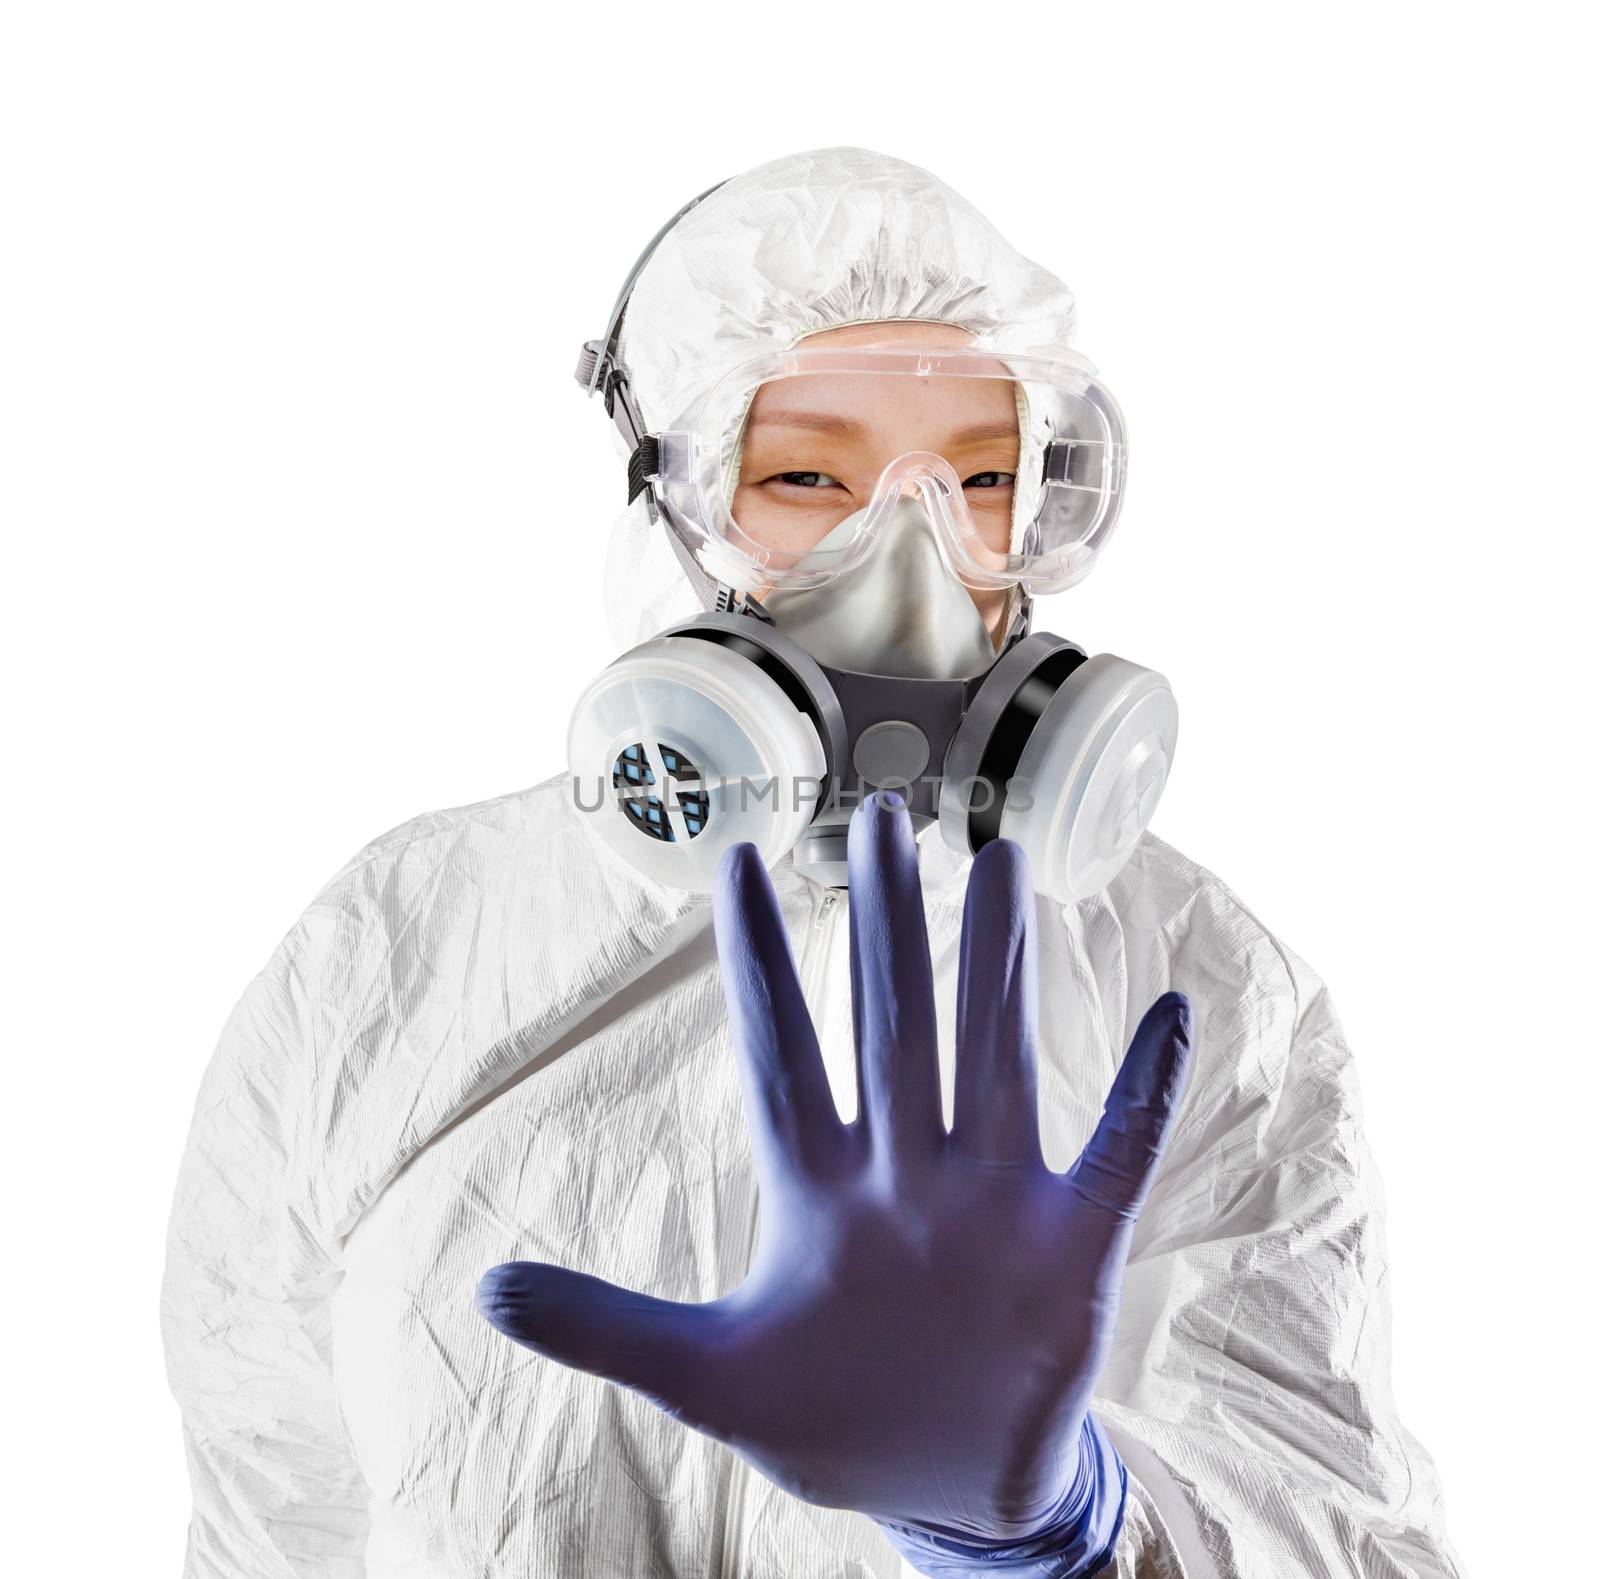 Chinese Woman Wearing Hazmat Suit, Protective Gas Mask and Goggles by Feverpitched